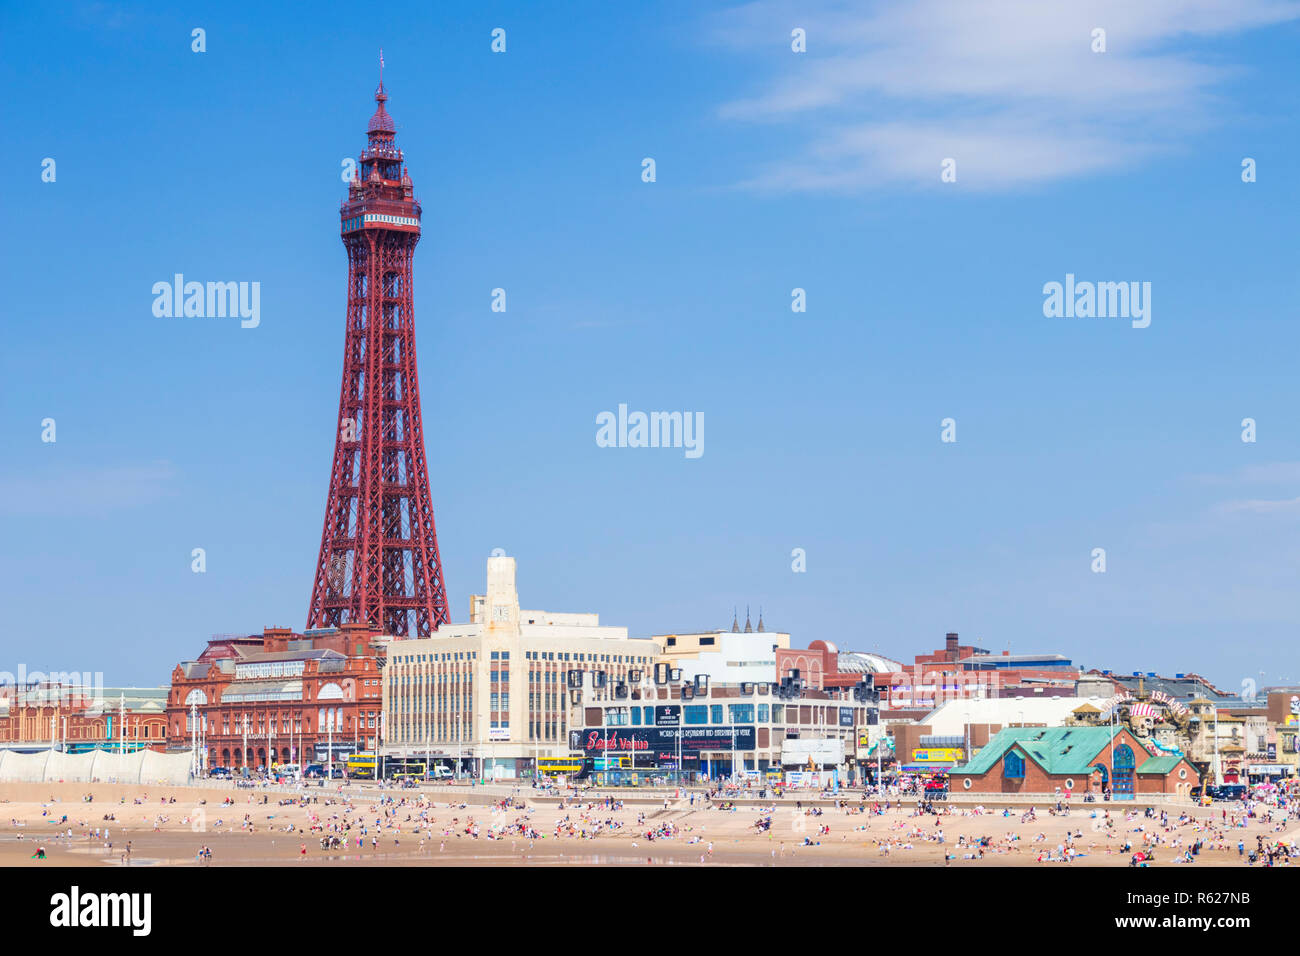 Blackpool tower tower ballroom and seafront promenade Blackpool Promenade Blackpool Lancashire England GB UK Europe Stock Photo